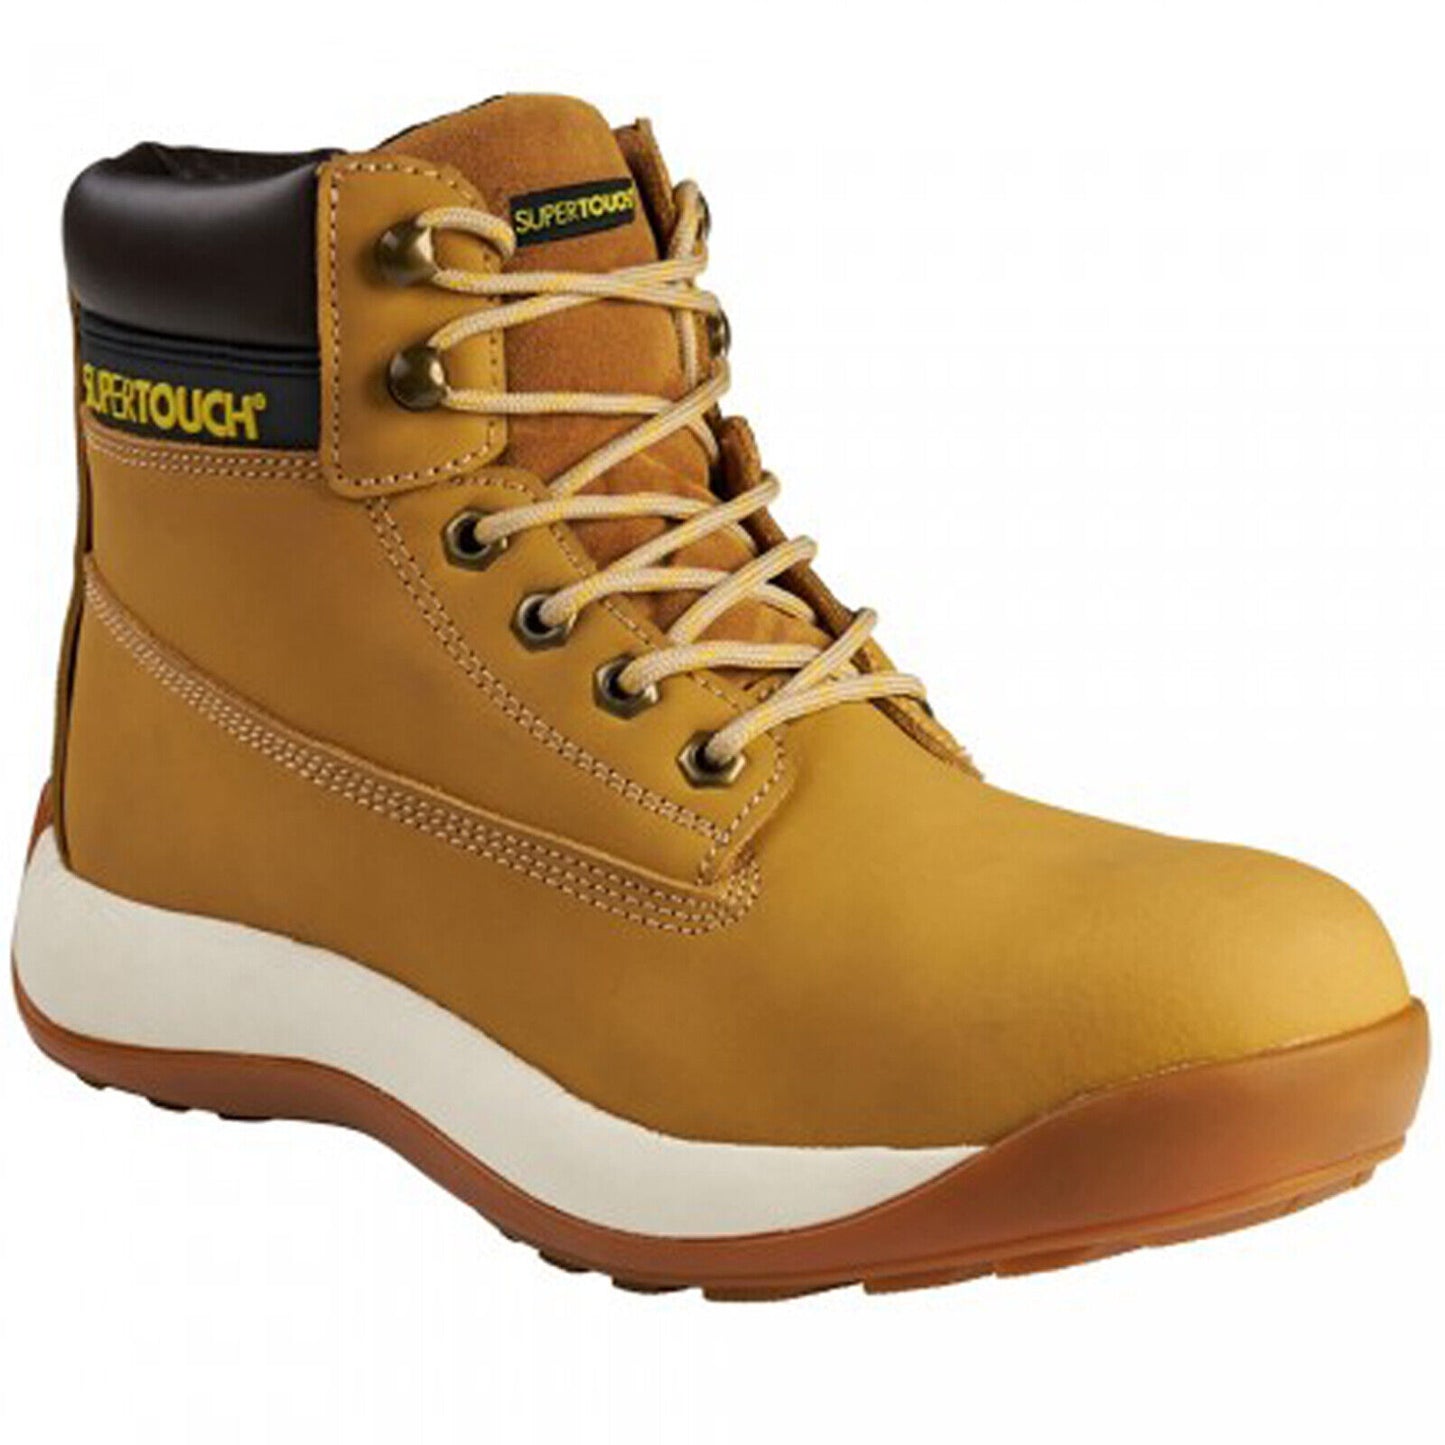 Mens Safety Work Boots Tan Black Men Leather Shoes Hiker MIDSOLE Steel Toe Boot